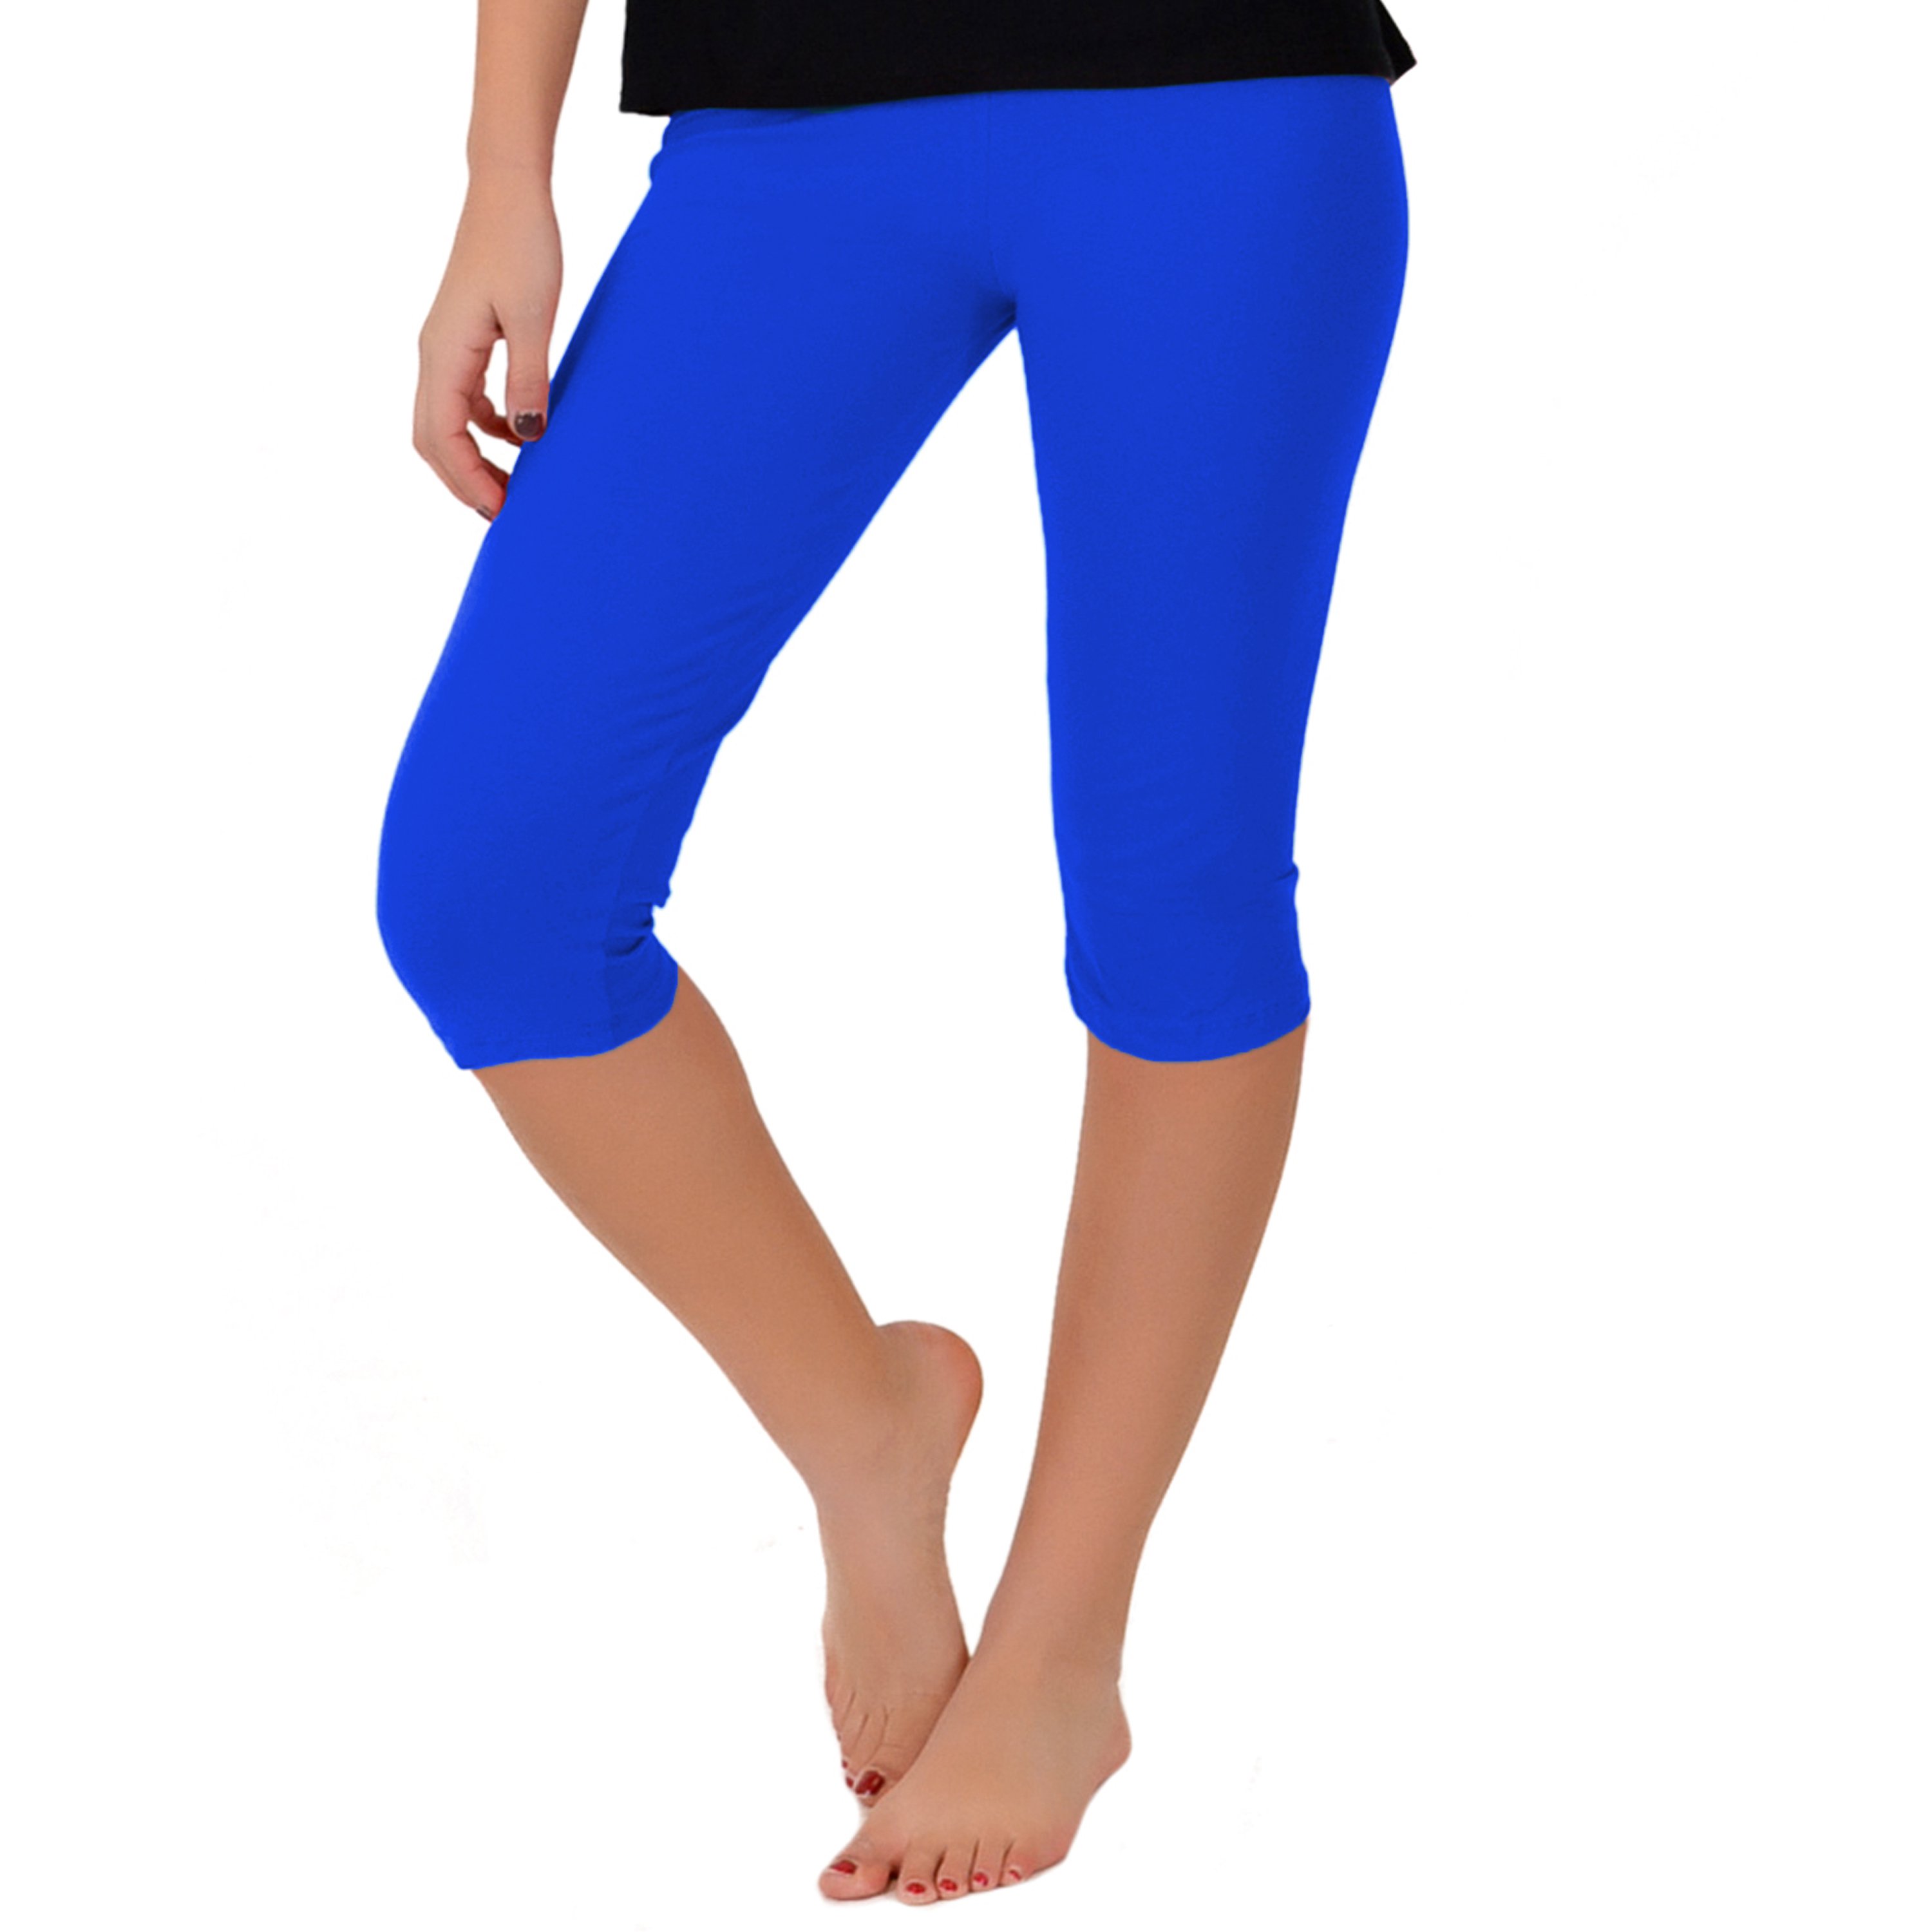 Stretch Is Comfort - Women's and Plus Size Knee-Length Leggings ...